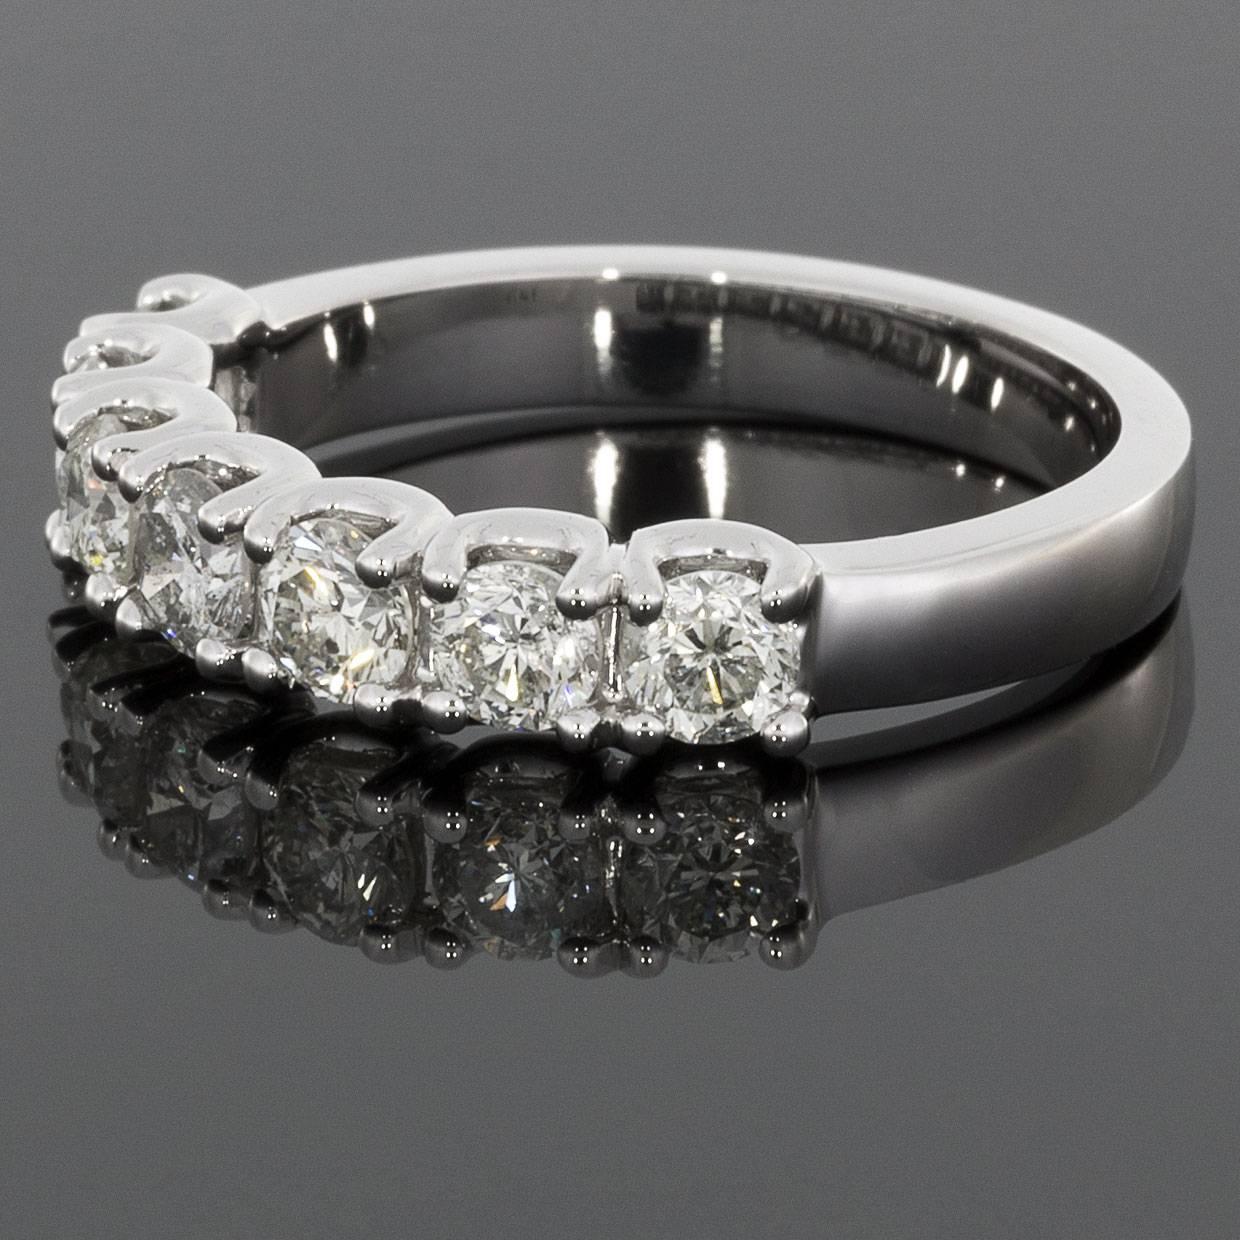 This custom made, classically styled band would make a wonderful wedding band or anniversary ring. The ring is comprised of 14 karat white gold & features 7 round brilliant cut diamonds that have a combined total weight of 1.05 carats. The